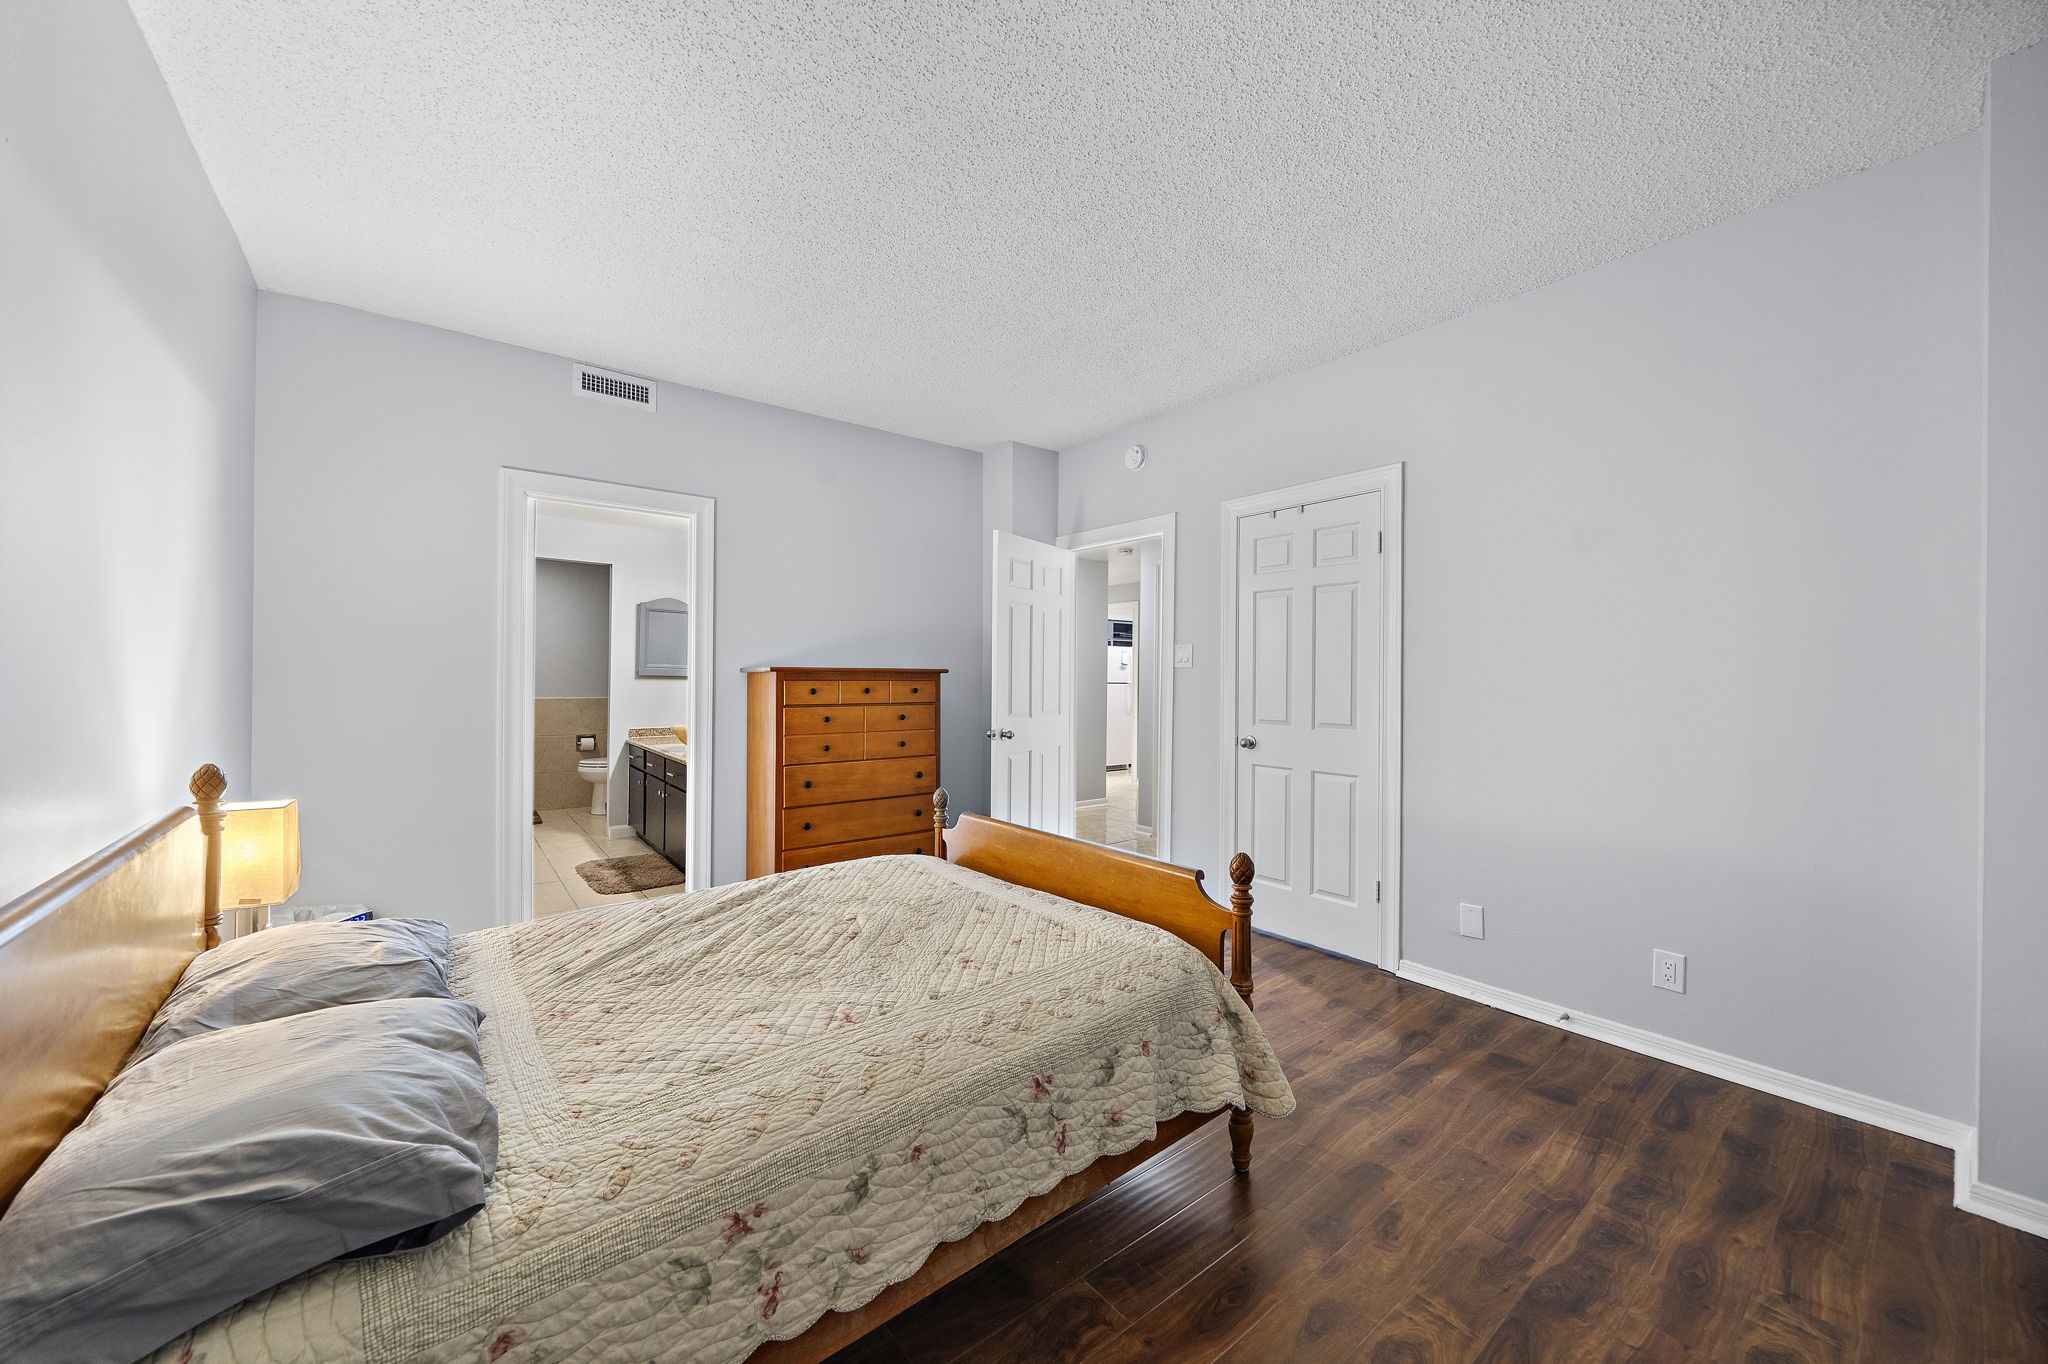 Bedroom with wooden floor, grey walls, two white doors, and a view into another room.